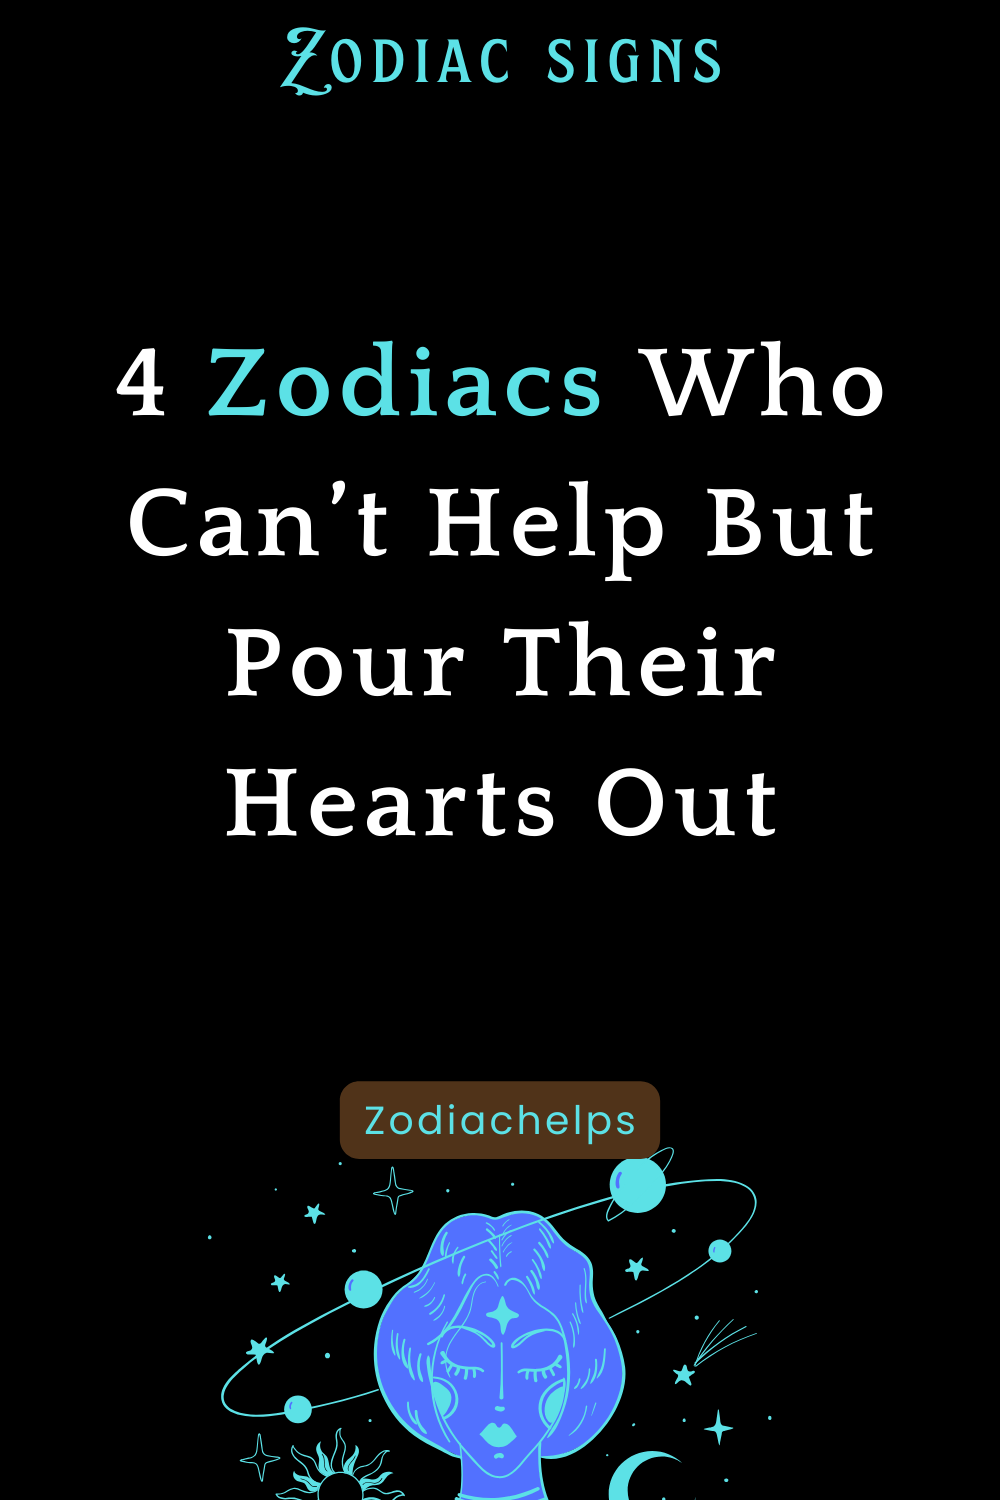 4 Zodiacs Who Can’t Help But Pour Their Hearts Out